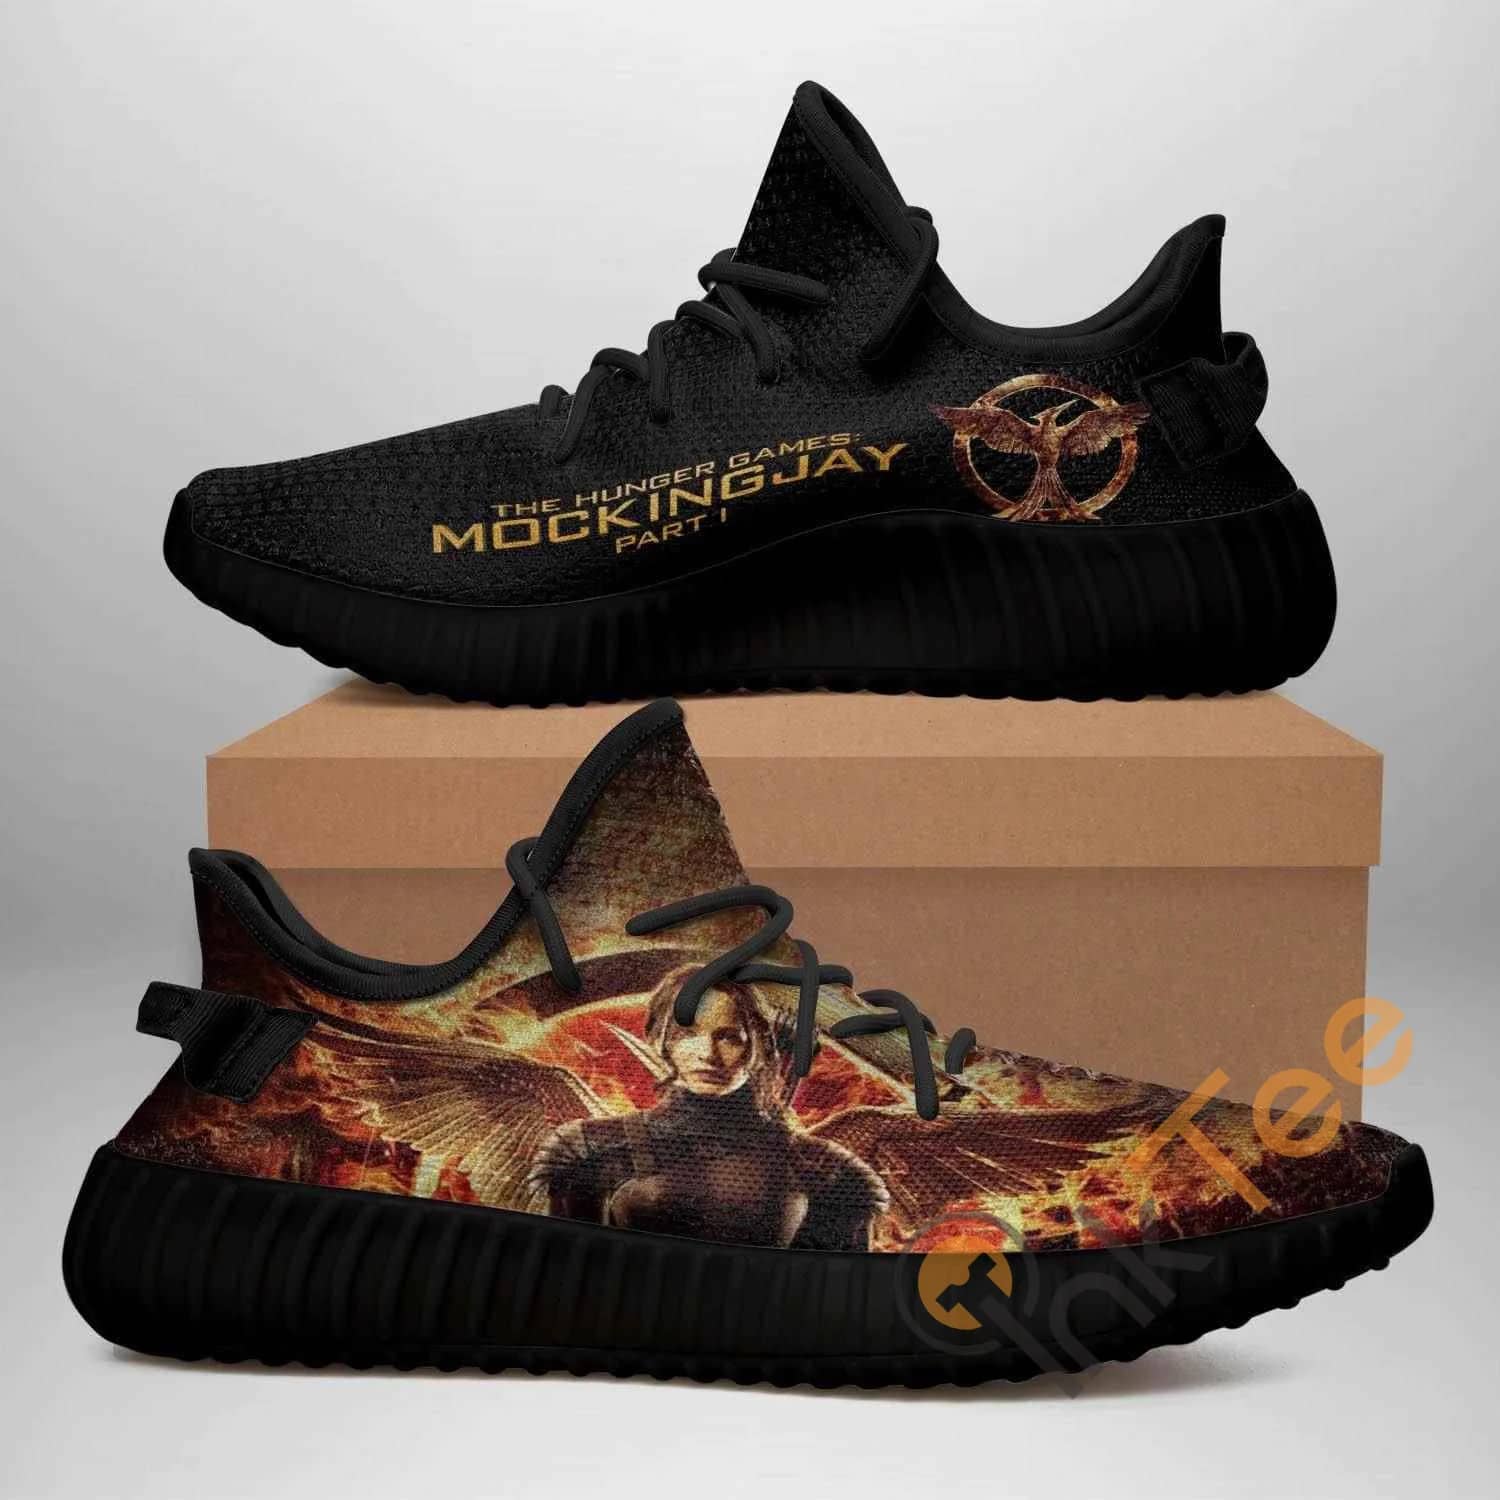 The Hunger Games Mocking Jay Black Edition Amazon Best Selling Yeezy Boost